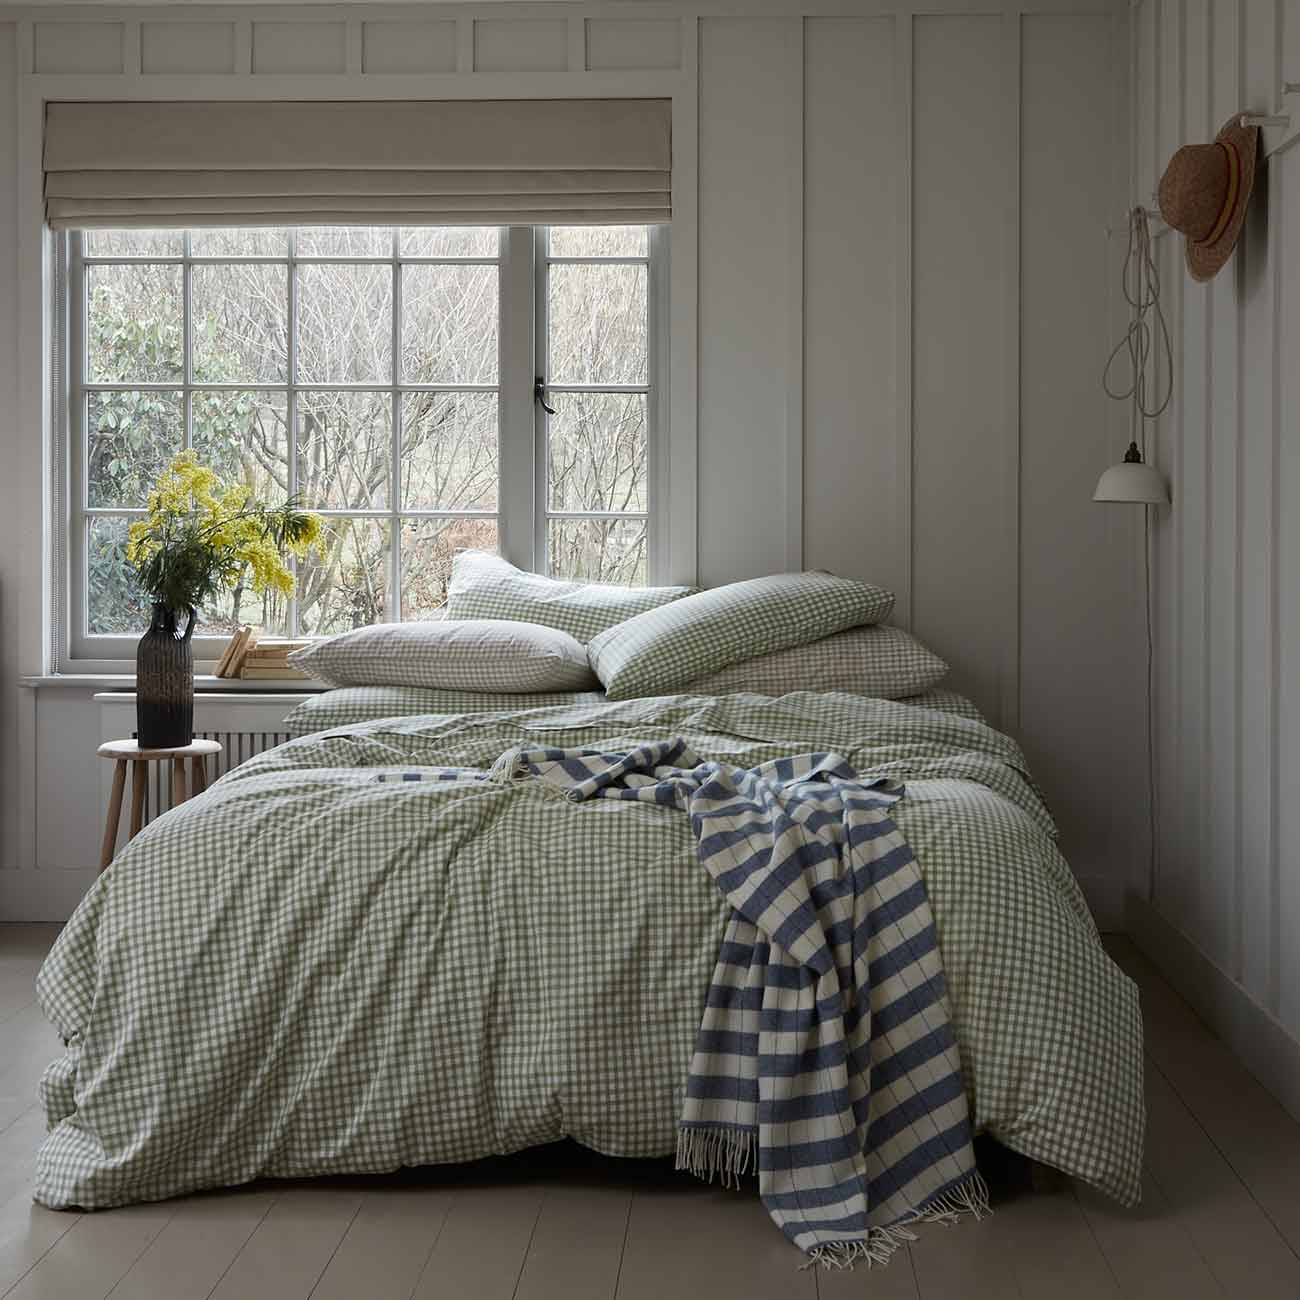 Pear Small Gingham Cotton Bedding with Warm Blue Check Stripe Wool Blanket 